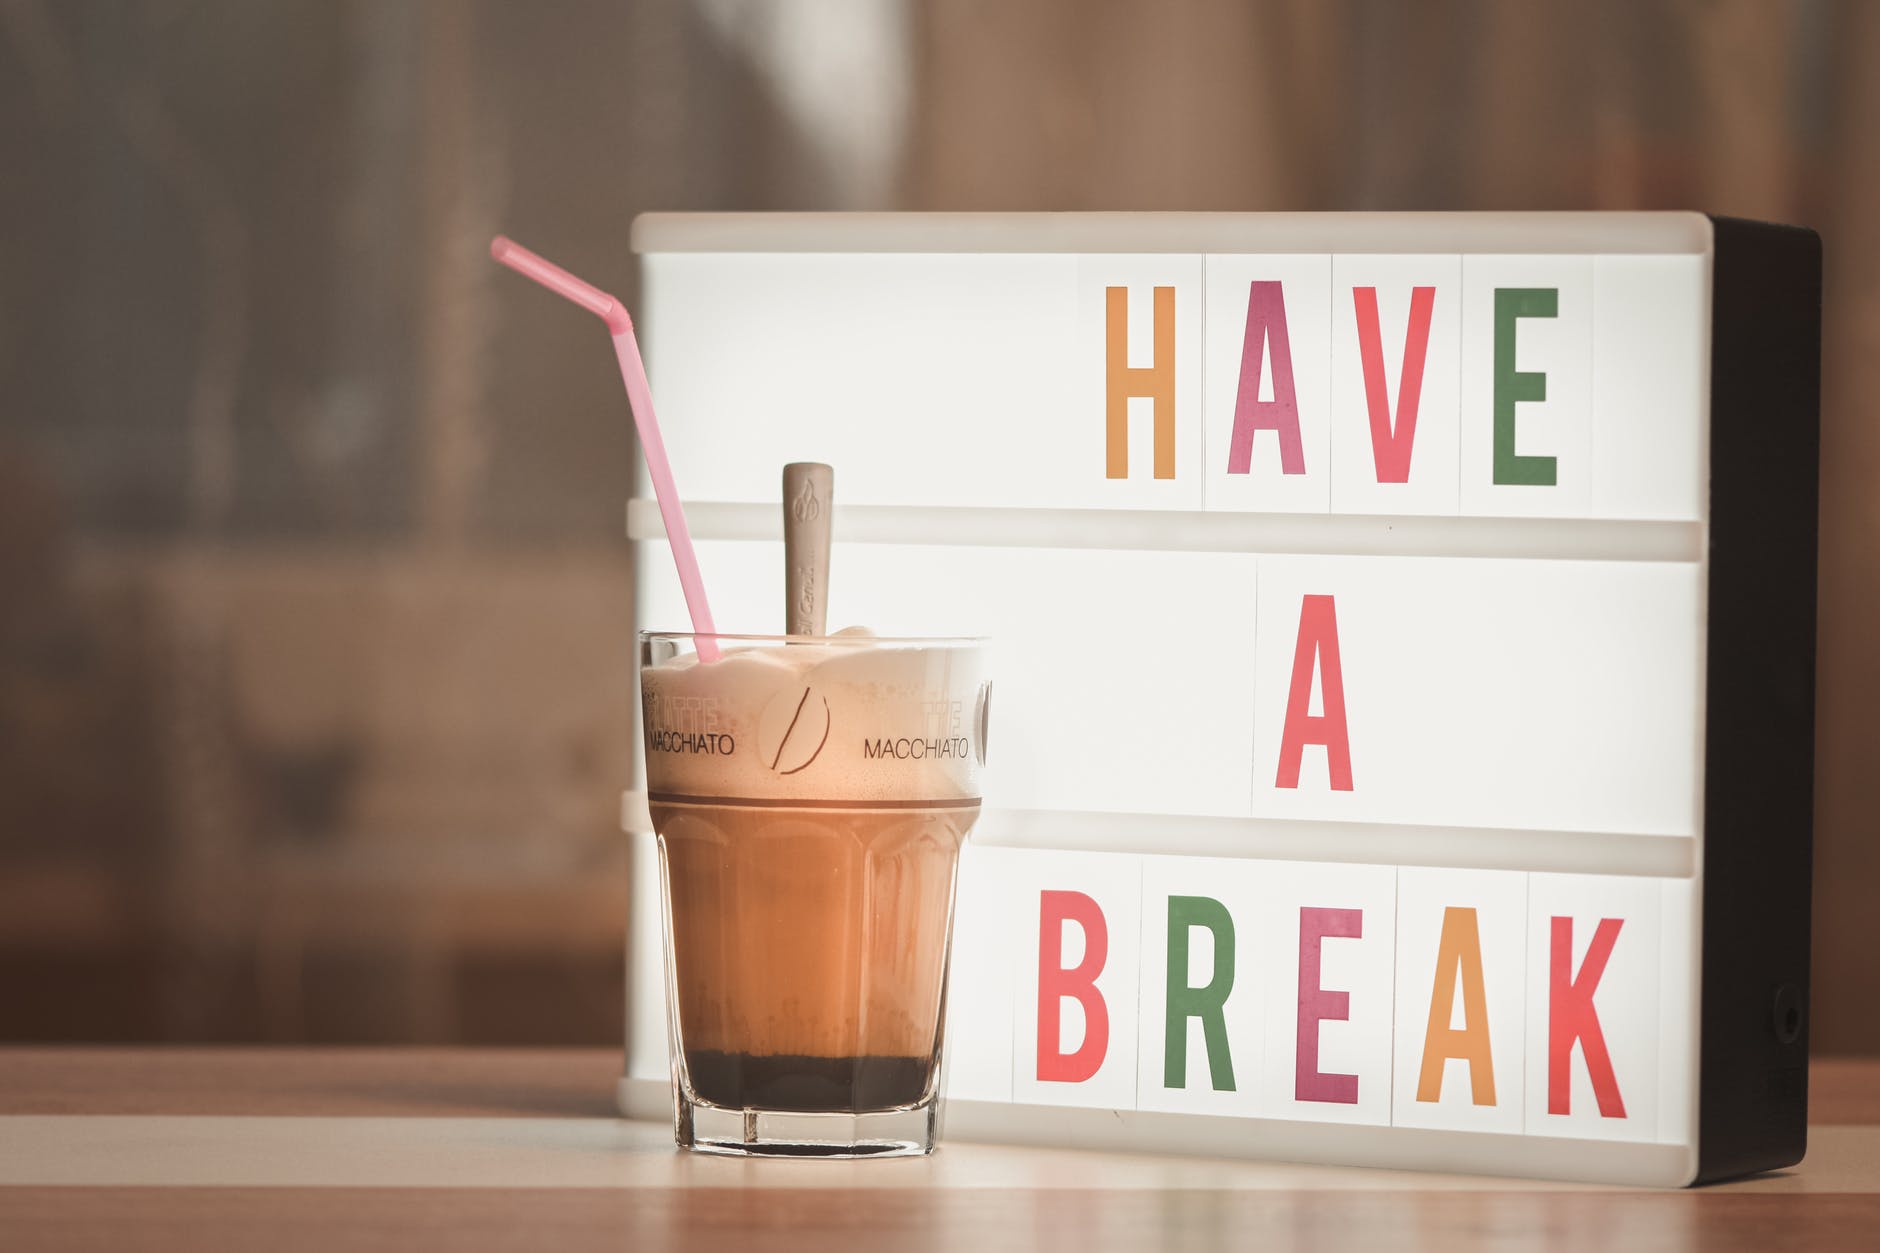 a have a break signage beside a cup of macchiato